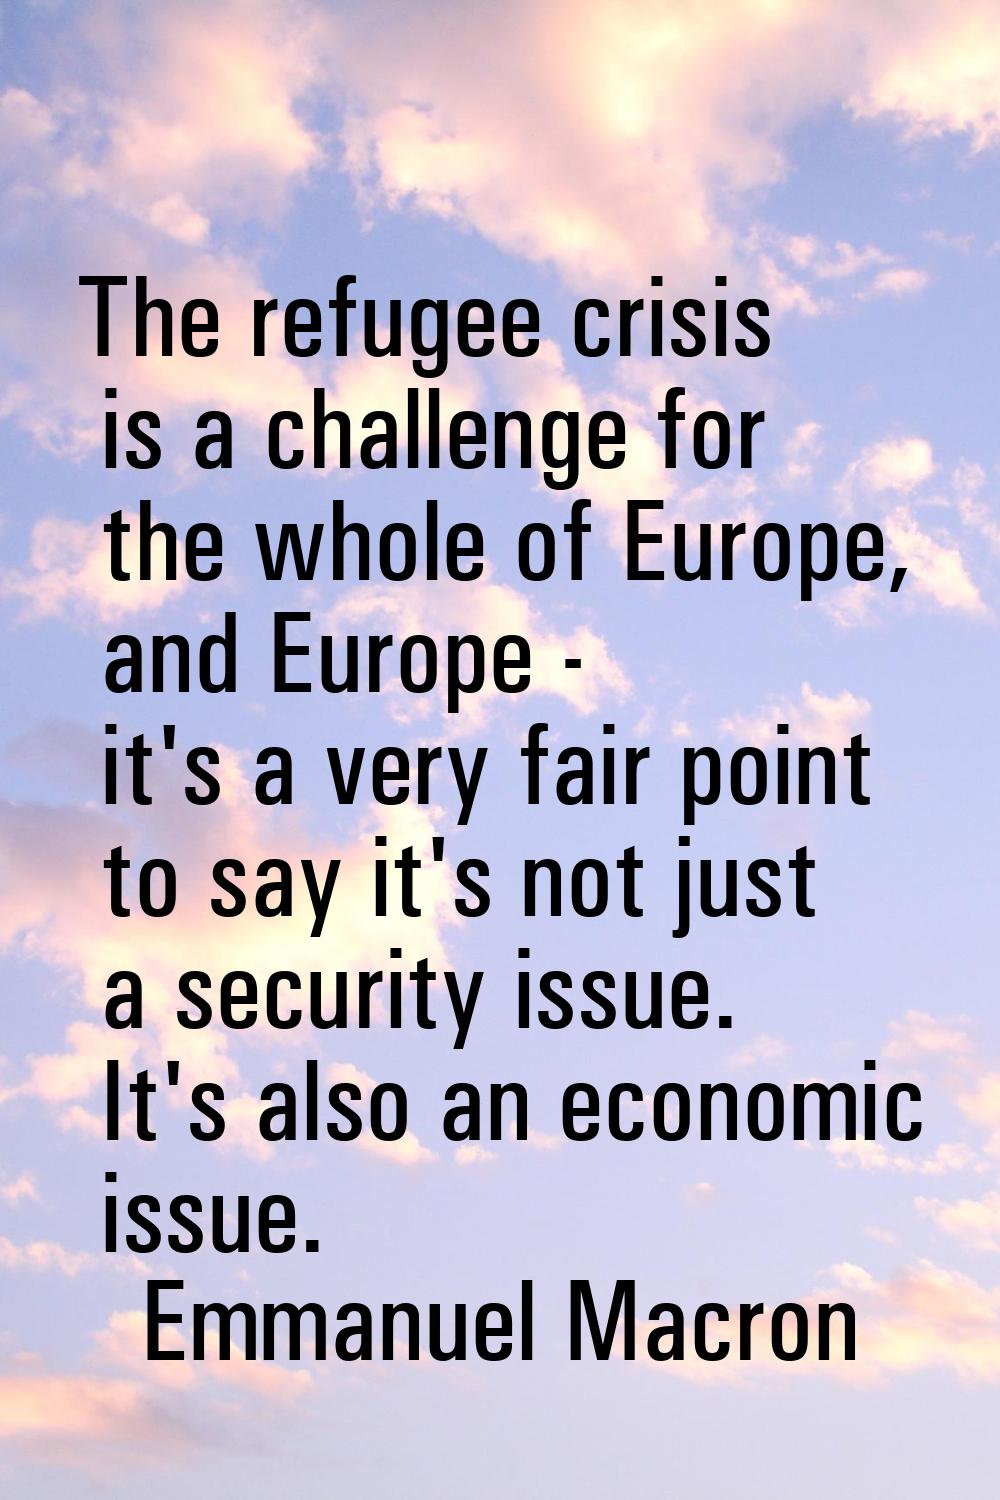 The refugee crisis is a challenge for the whole of Europe, and Europe - it's a very fair point to s